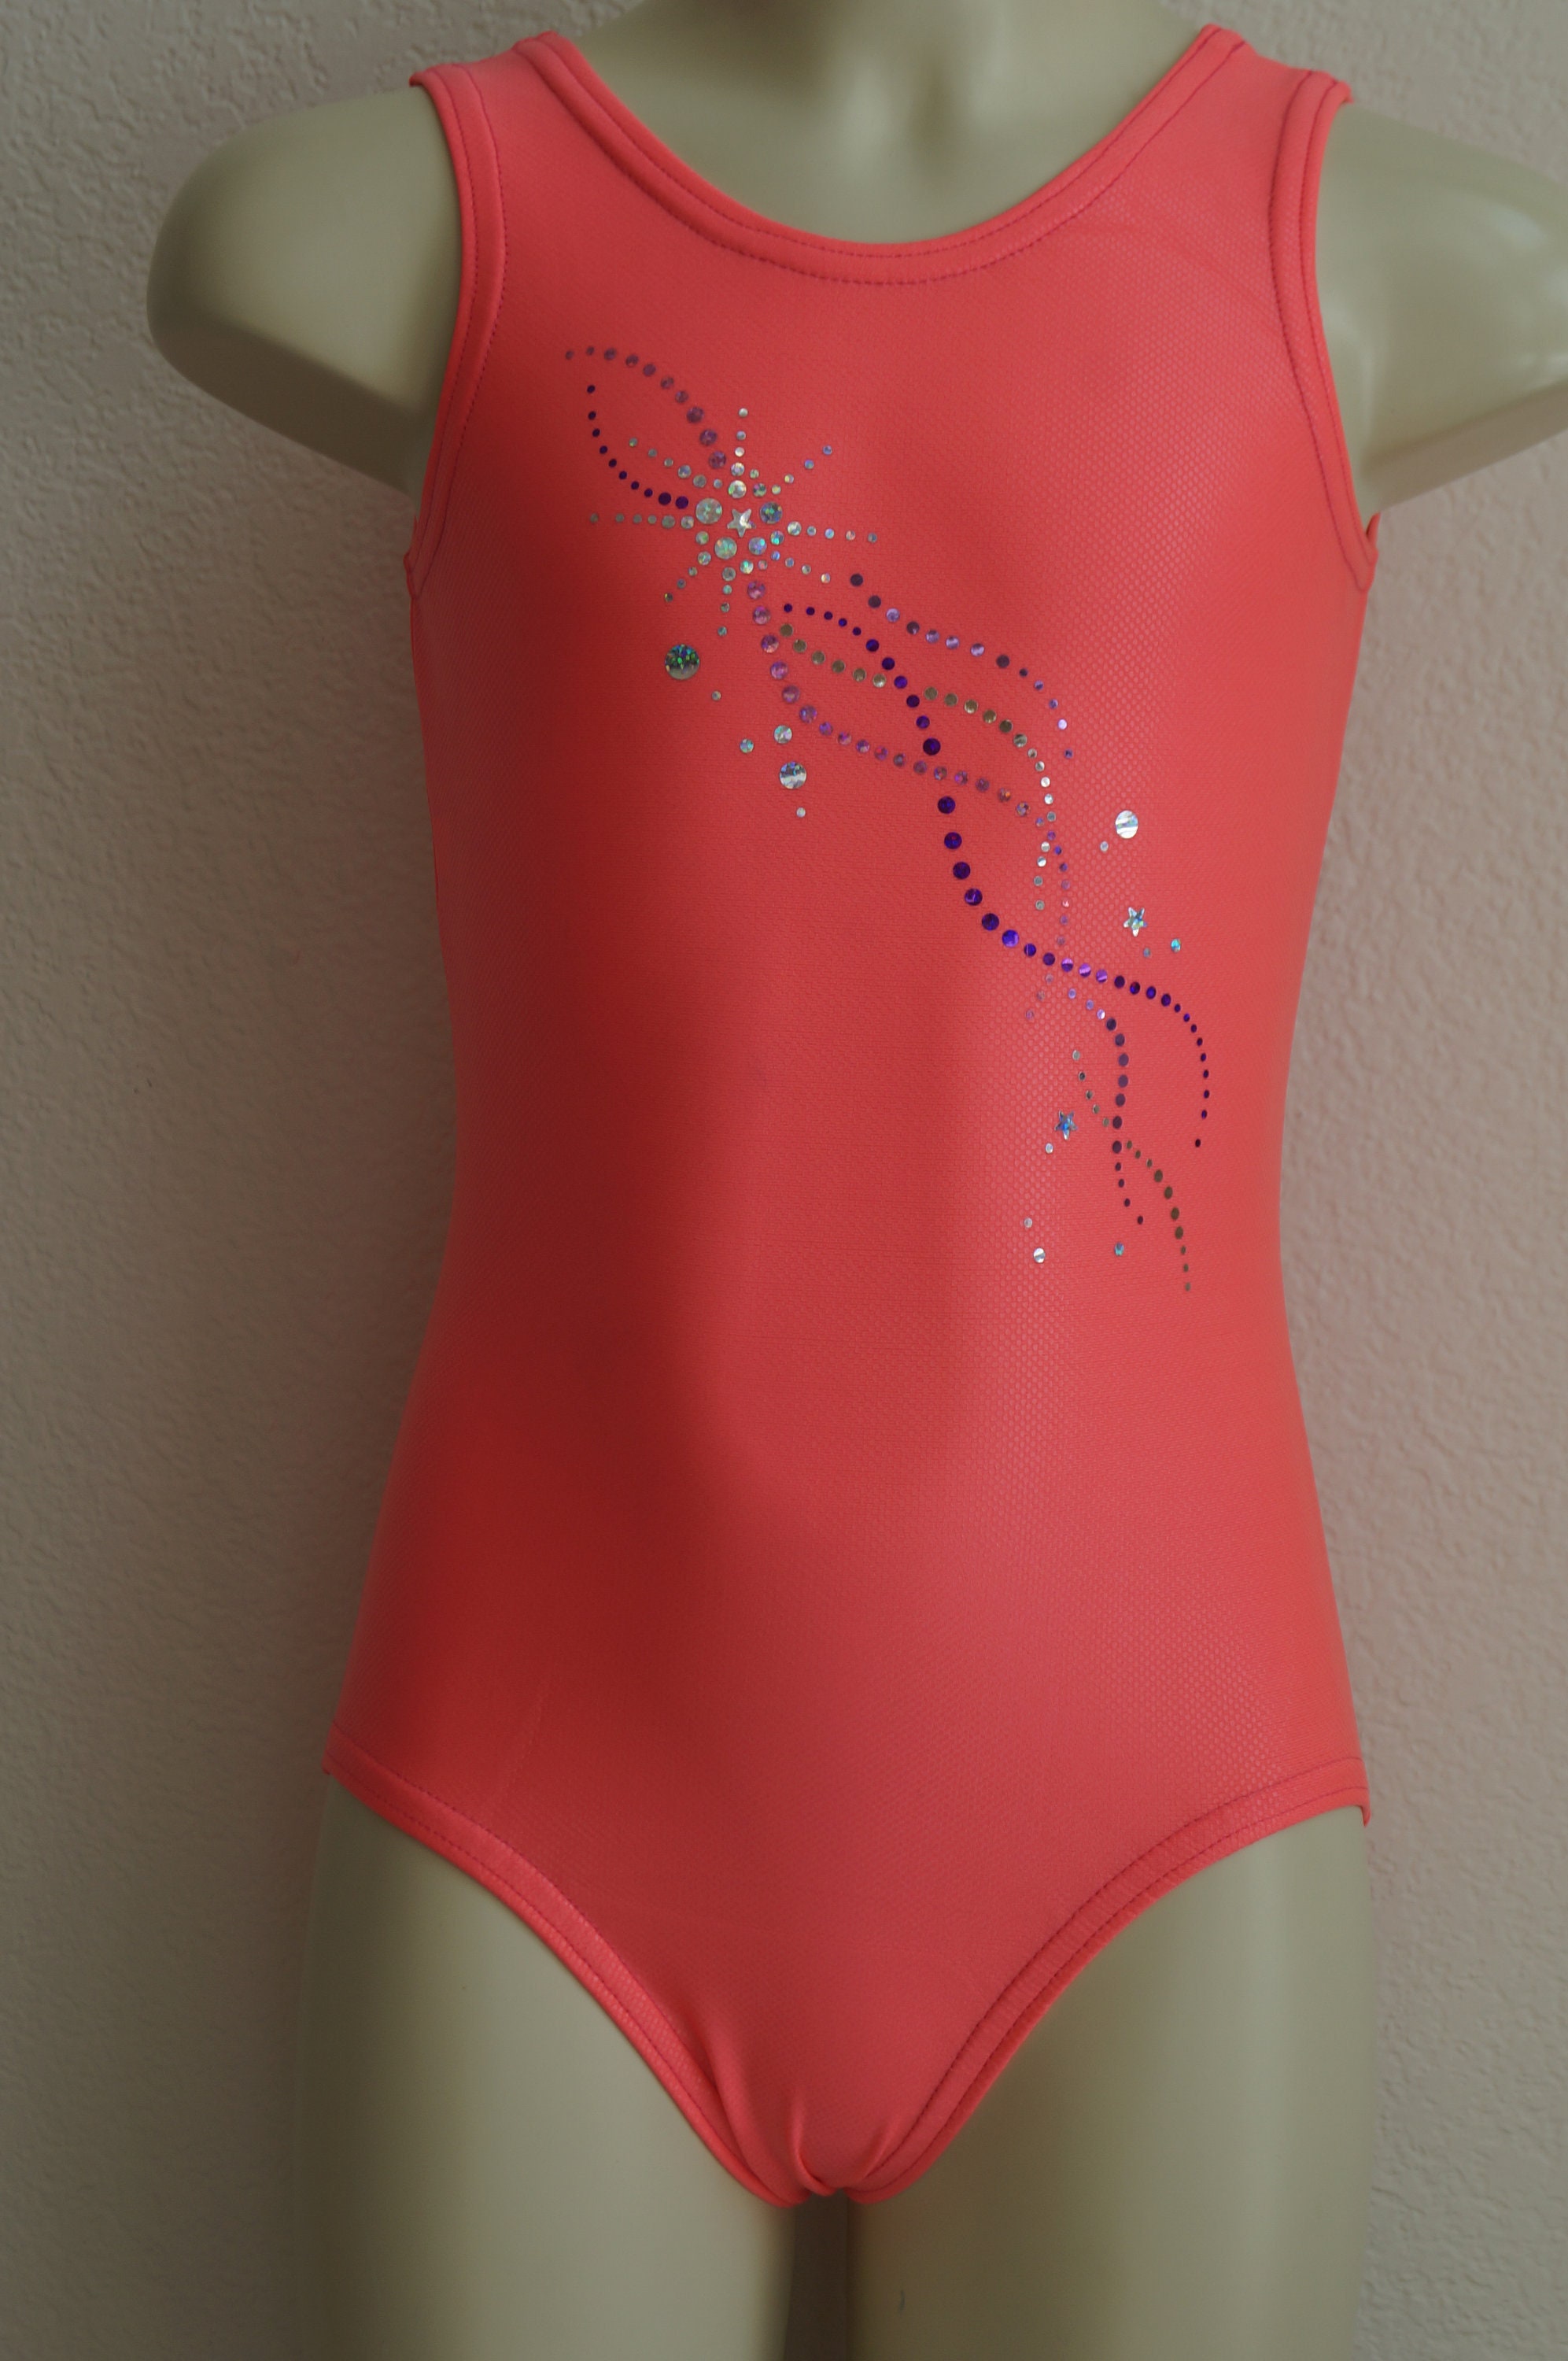 Custom Hot Pink Leotard with Open Back and Ruffles - Rhinestones – Crystal  Couture